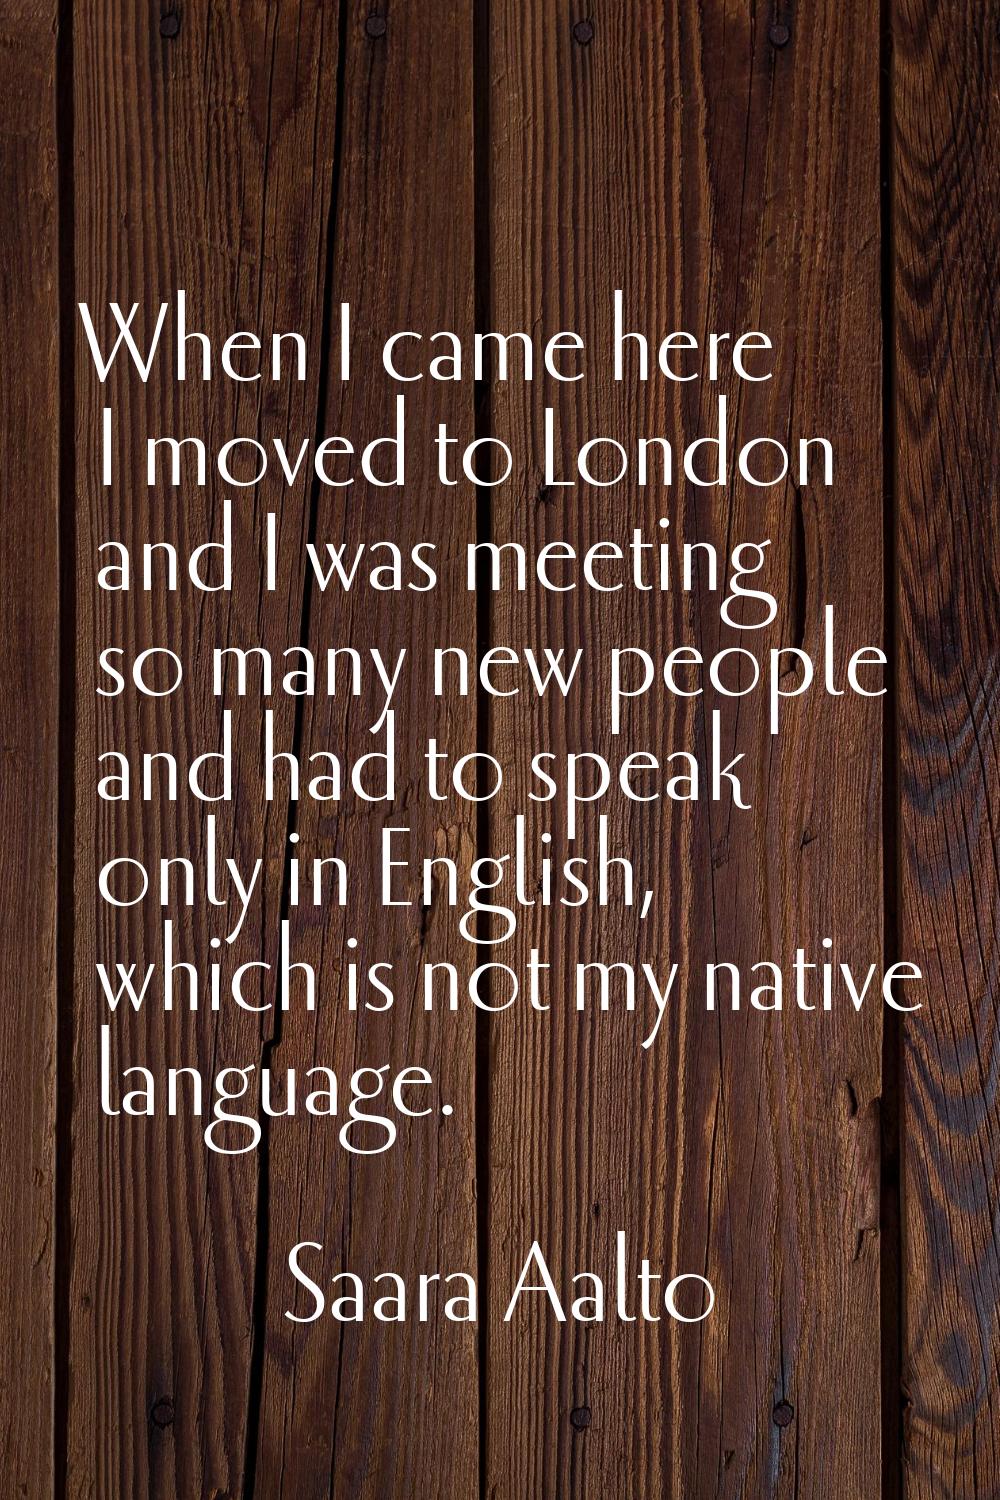 When I came here I moved to London and I was meeting so many new people and had to speak only in En